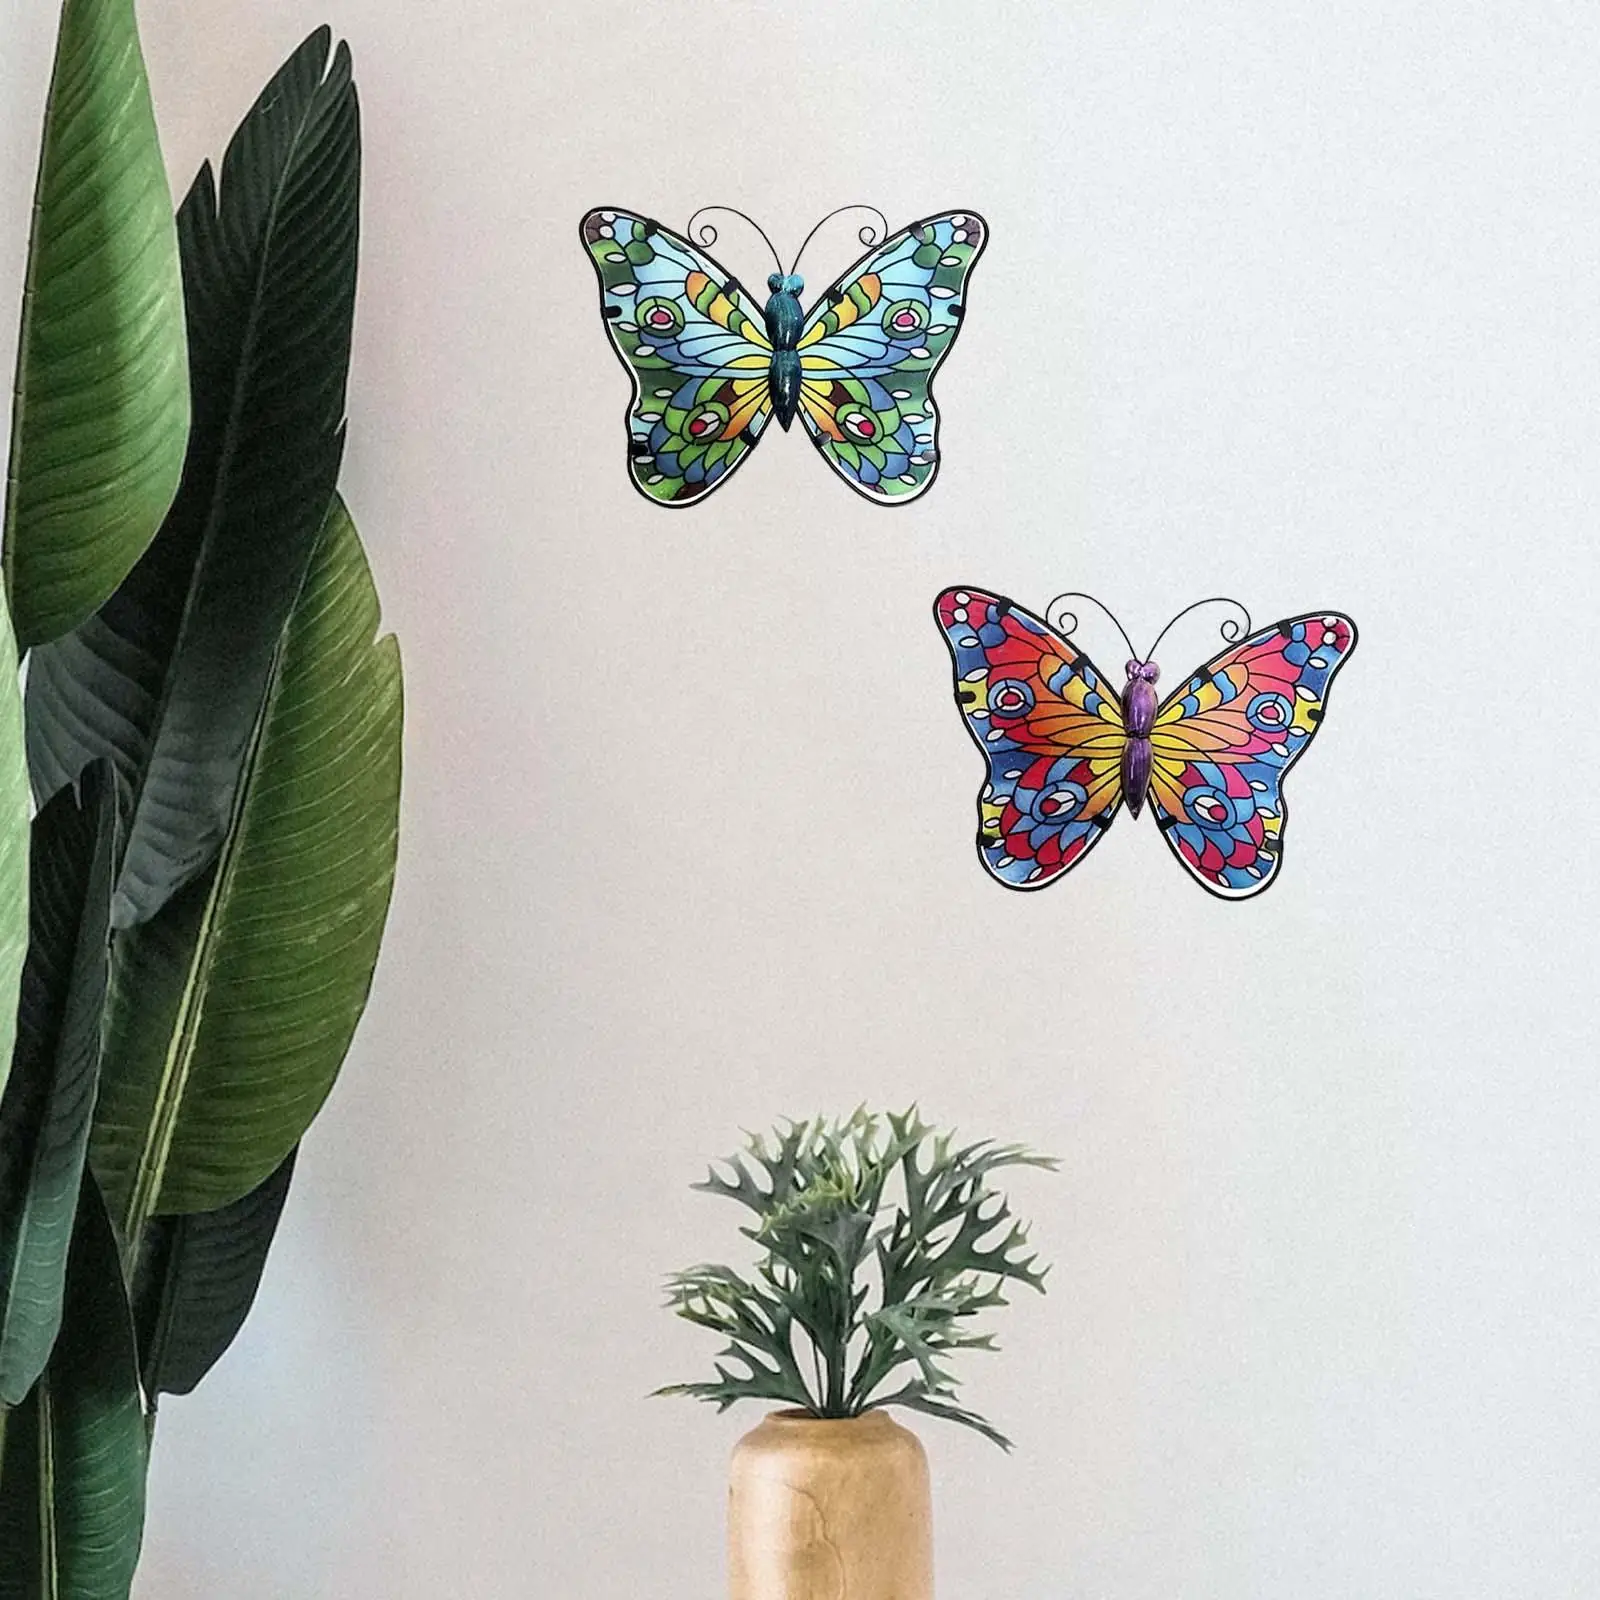 2x 3D Butterfly Ornaments Figurine Plaque Hanging Ornament Metal Wall Decor for Patio Home Indoor Decoration Bedroom